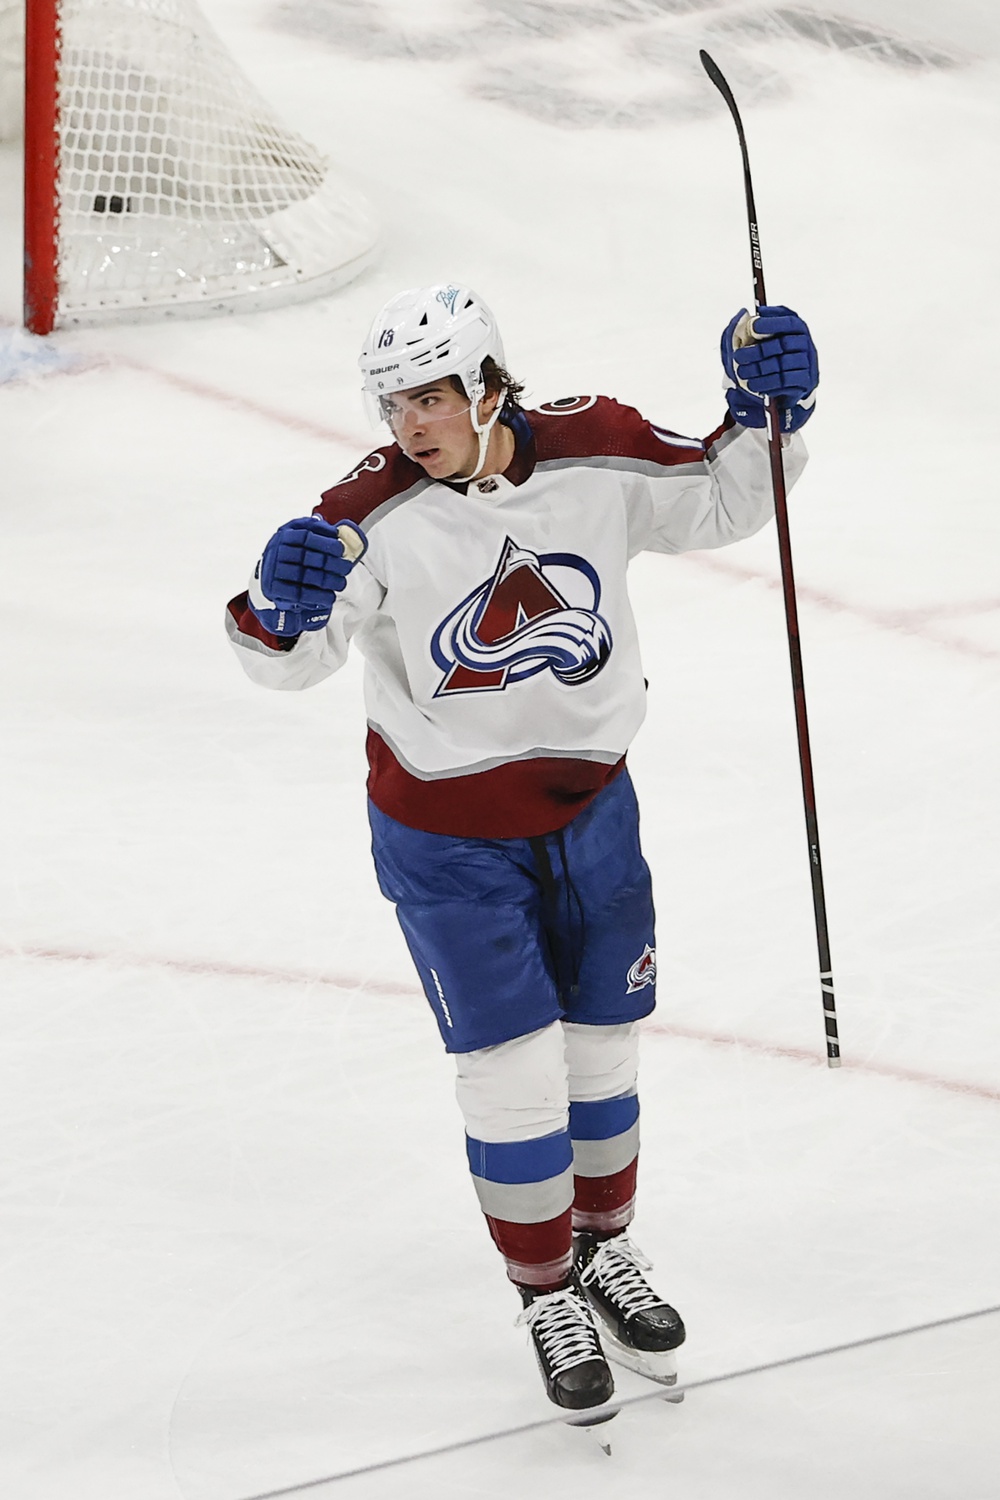 Why the Sam Girard contract signing was another home run for the Avalanche  - Colorado Hockey Now